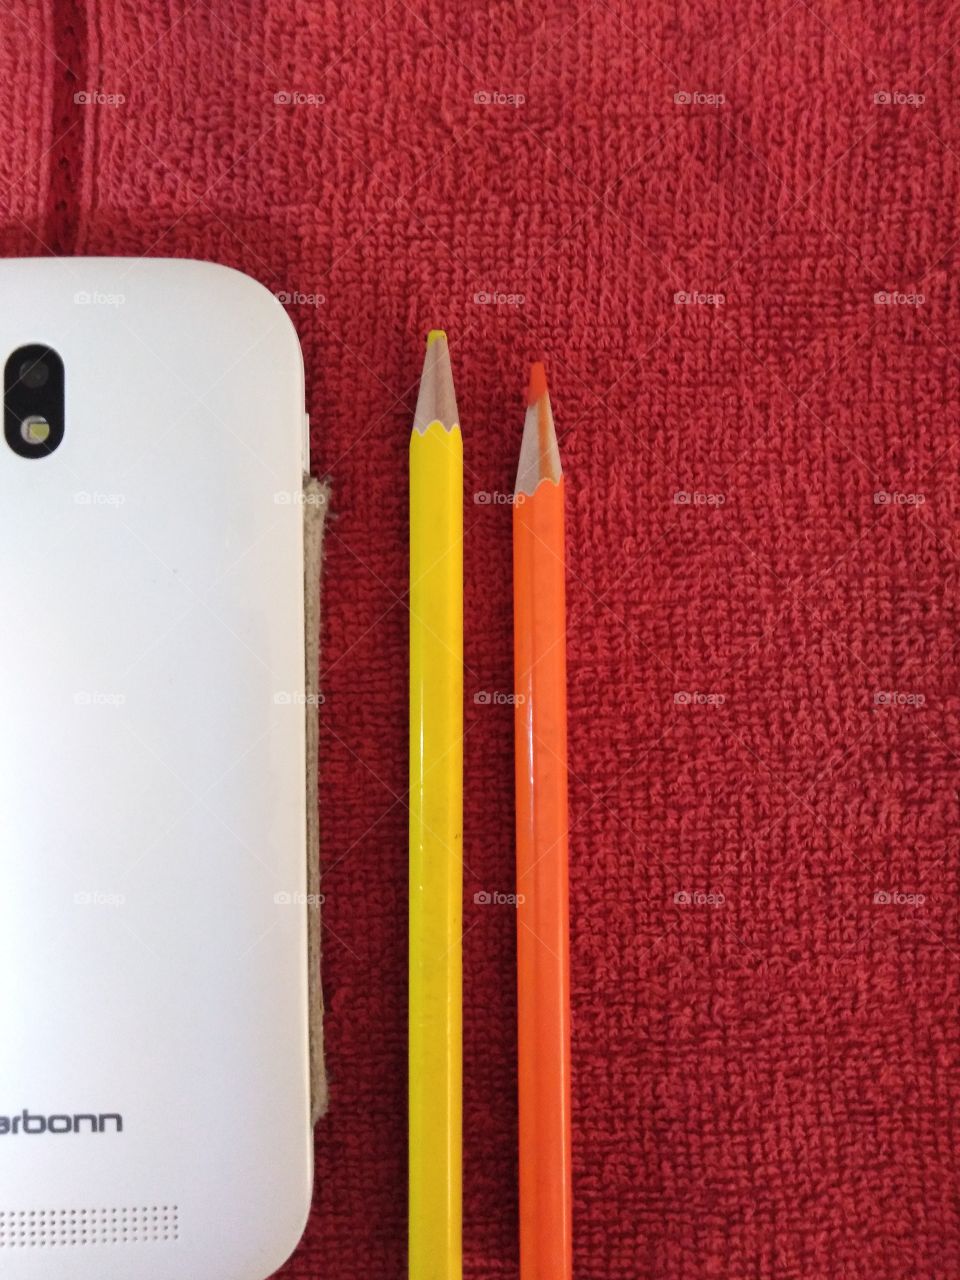 Smartphone and pencil